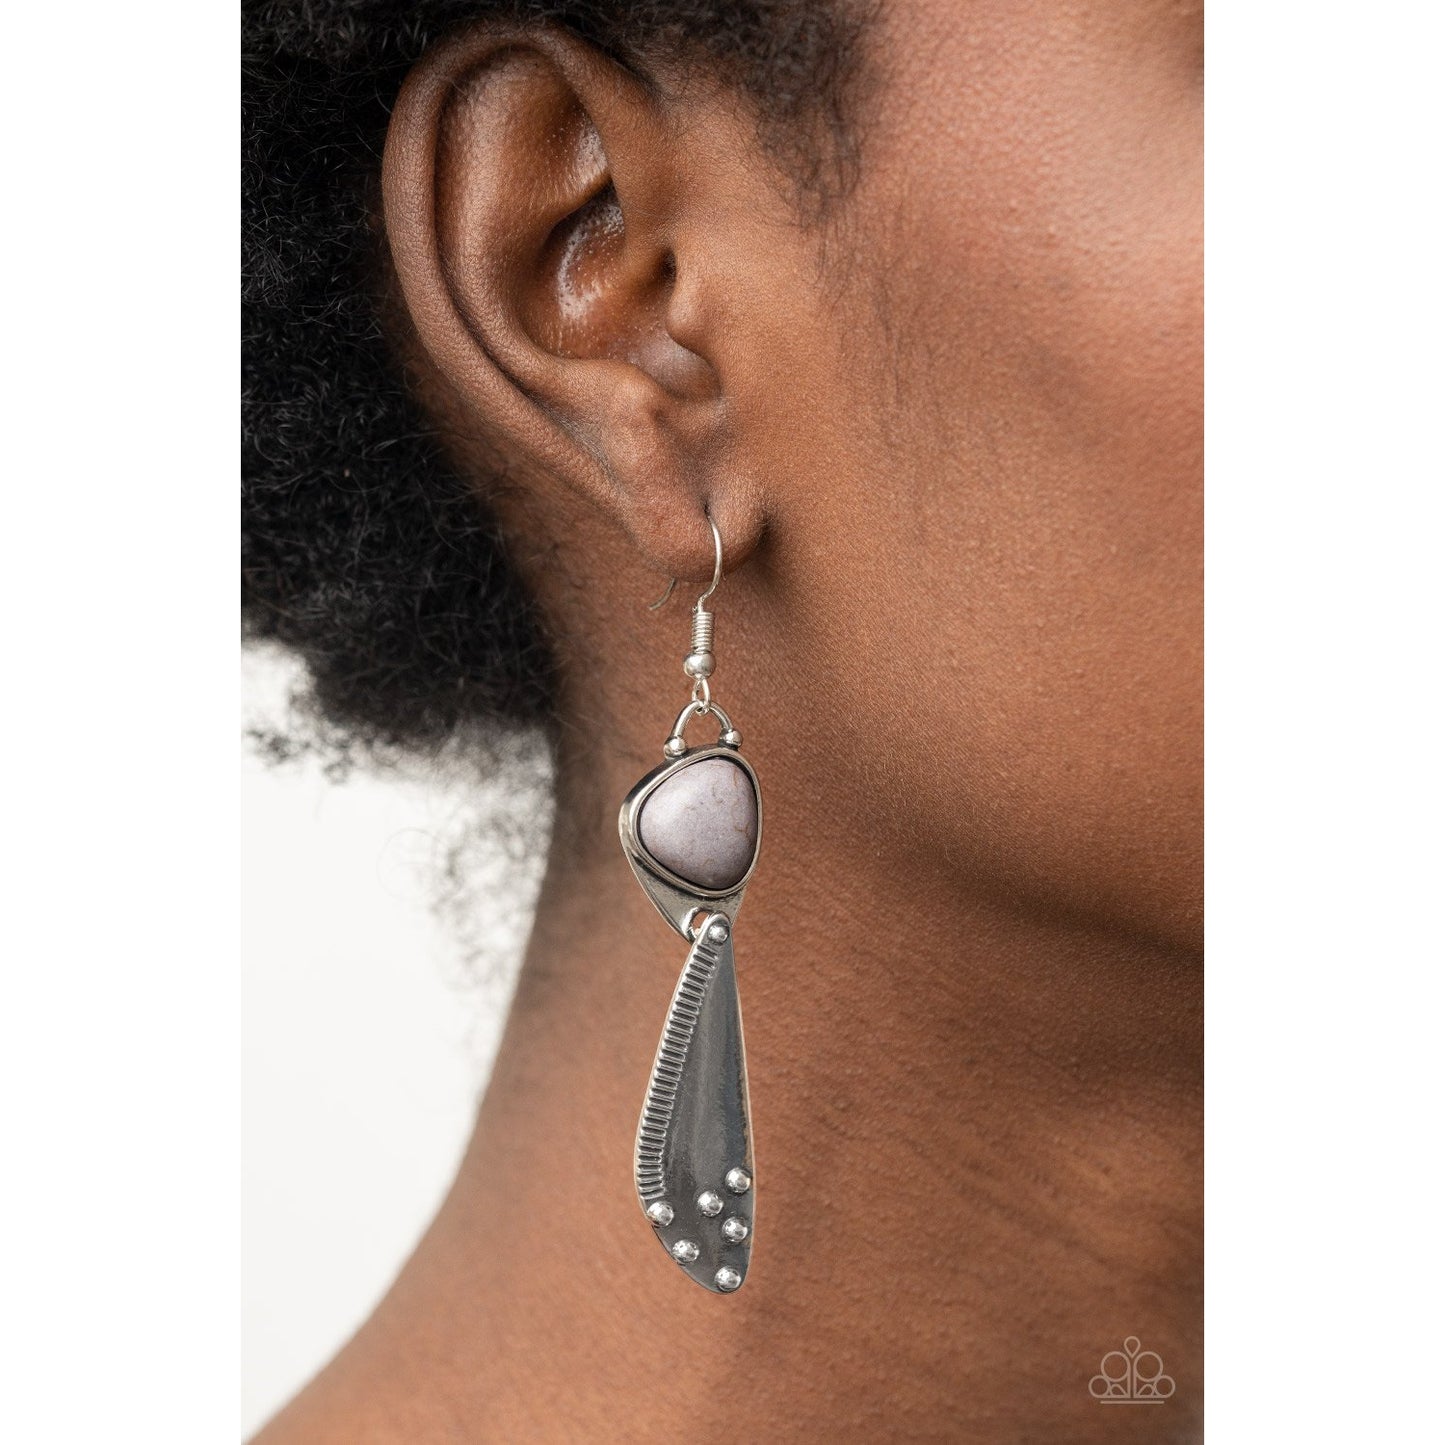 Going-Green Goddess - Silver Earrings - Paparazzi Accessories - GlaMarous Titi Jewels